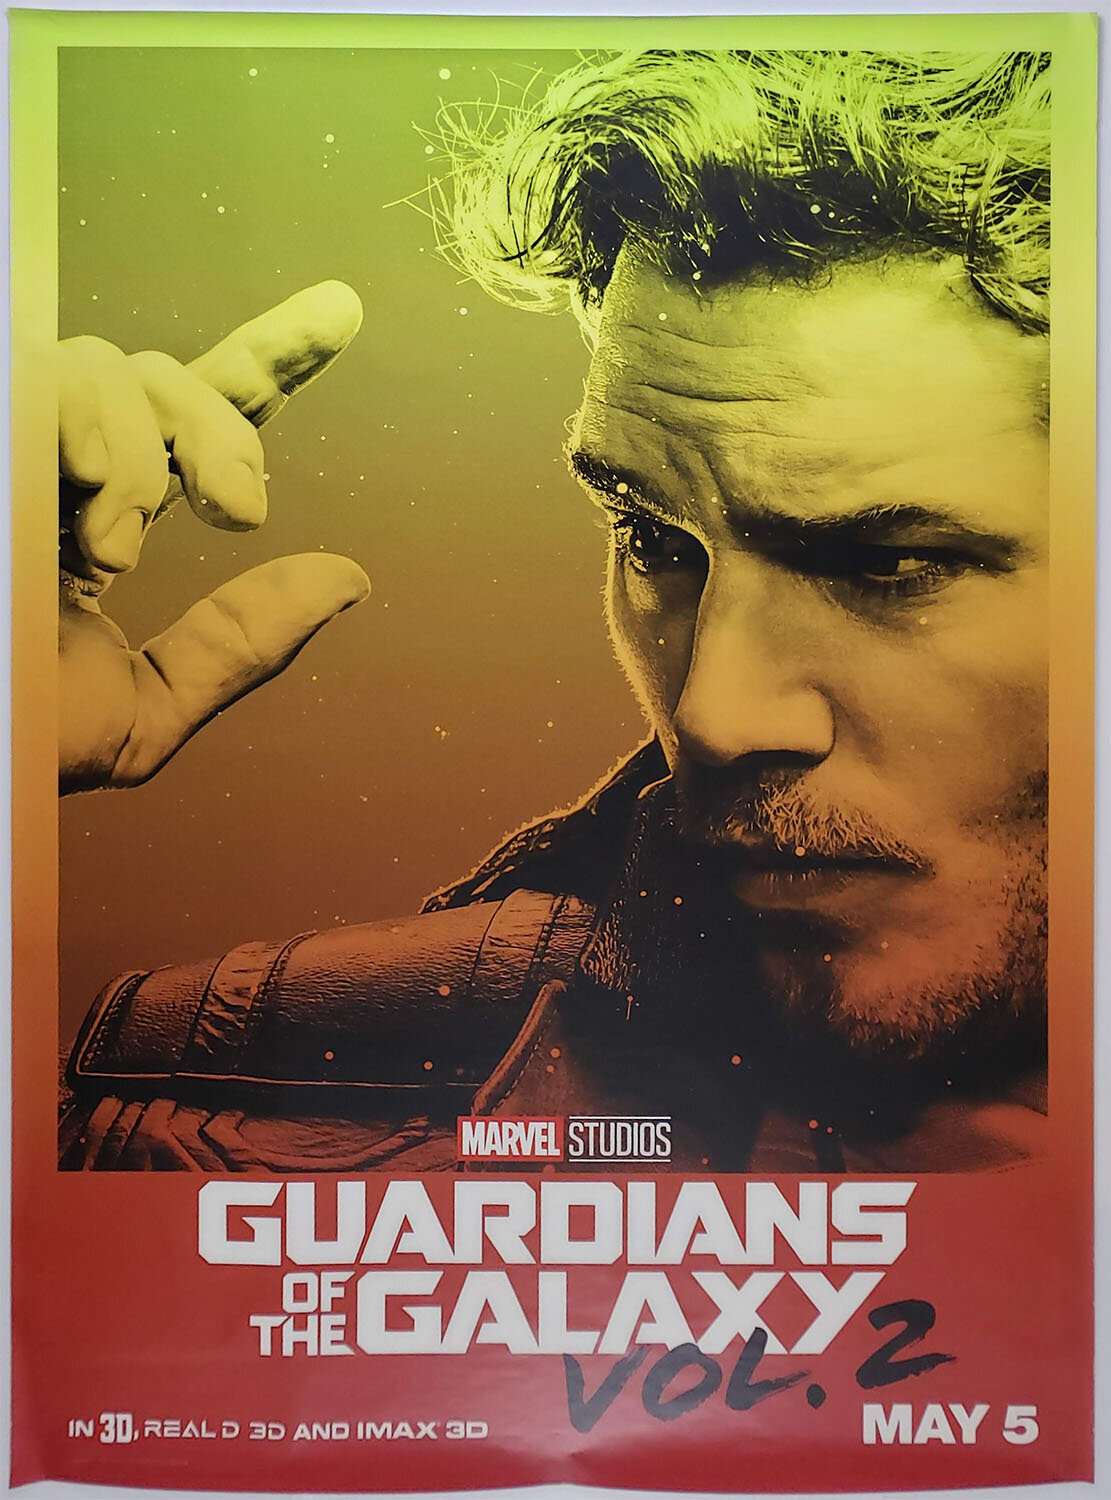 Starlord-Guardians-of-the-galaxy-Wilding-poster